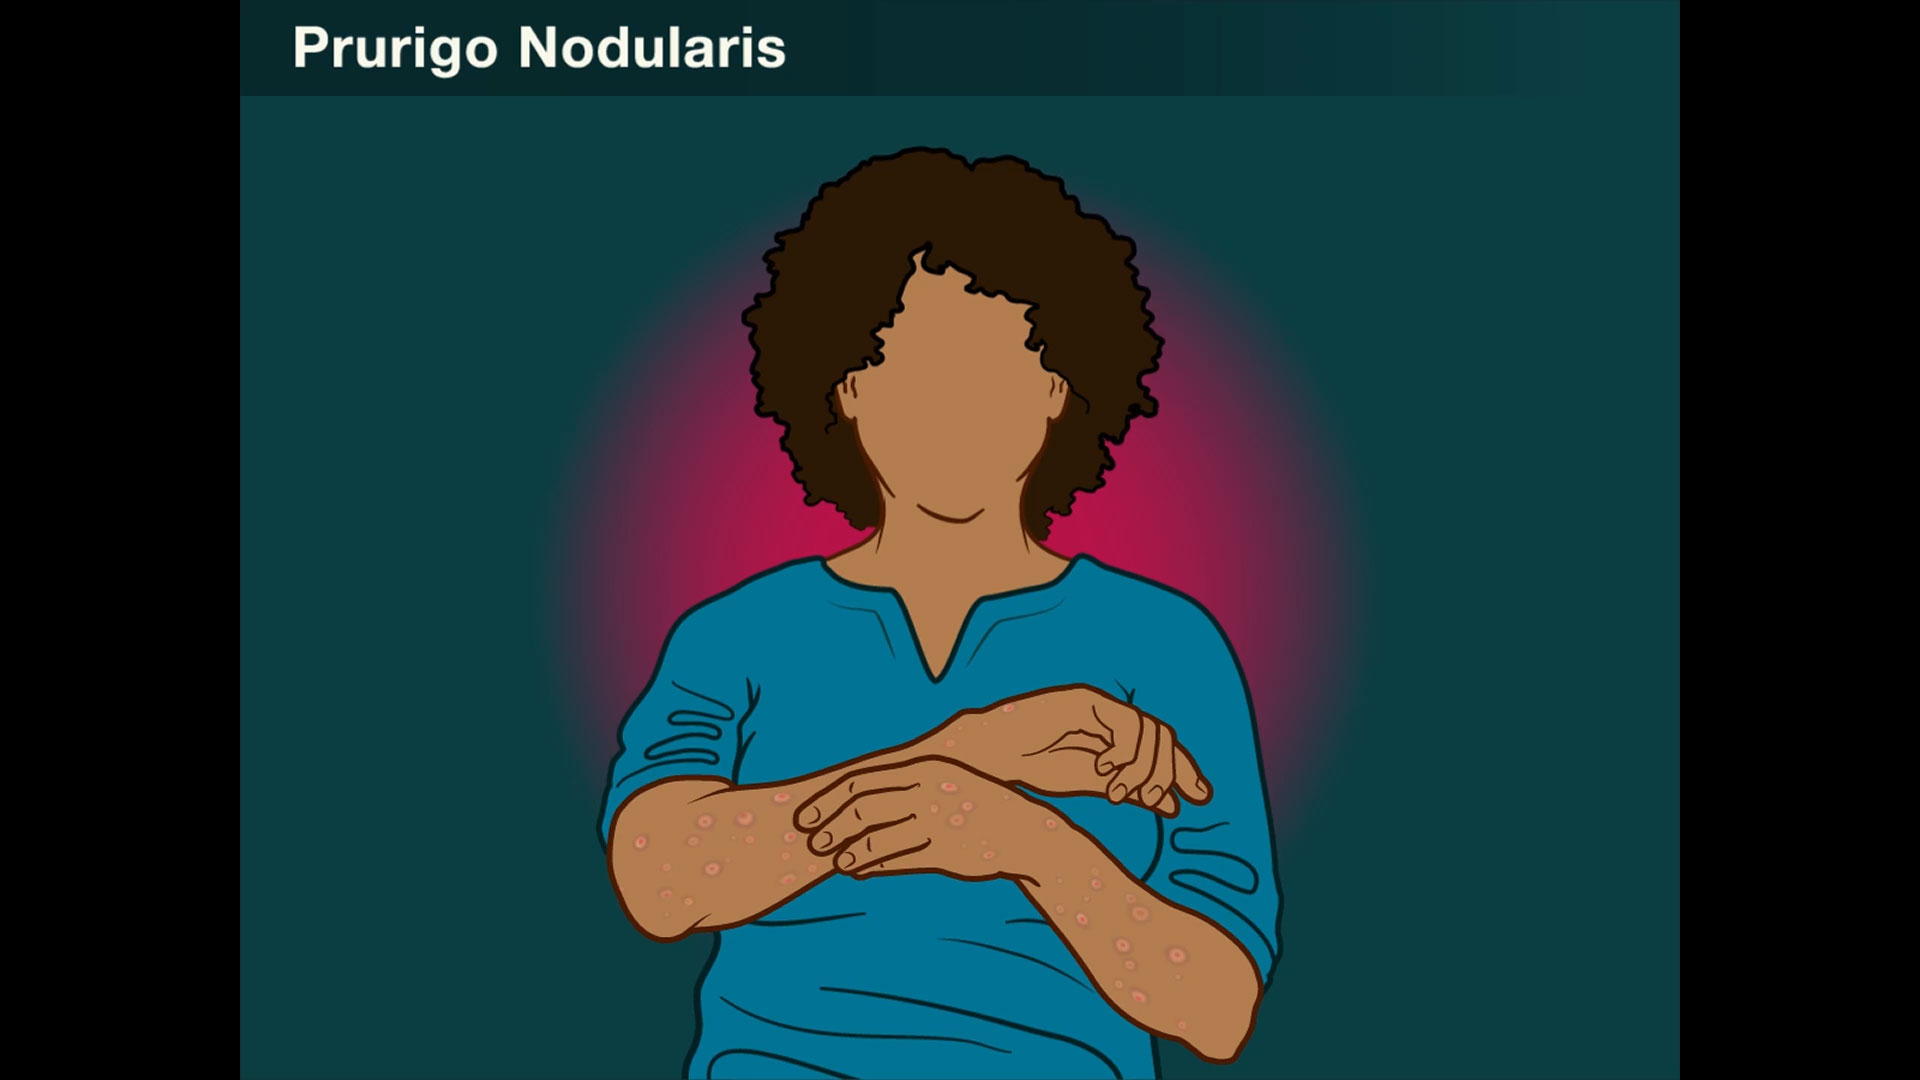 Prurigo nodularis is a chronic, debilitating skin disease characterized by severe itching and widespread nodular lesions. Nemolizumab is under study as a potential treatment option. New research findings are summarized in a short video.